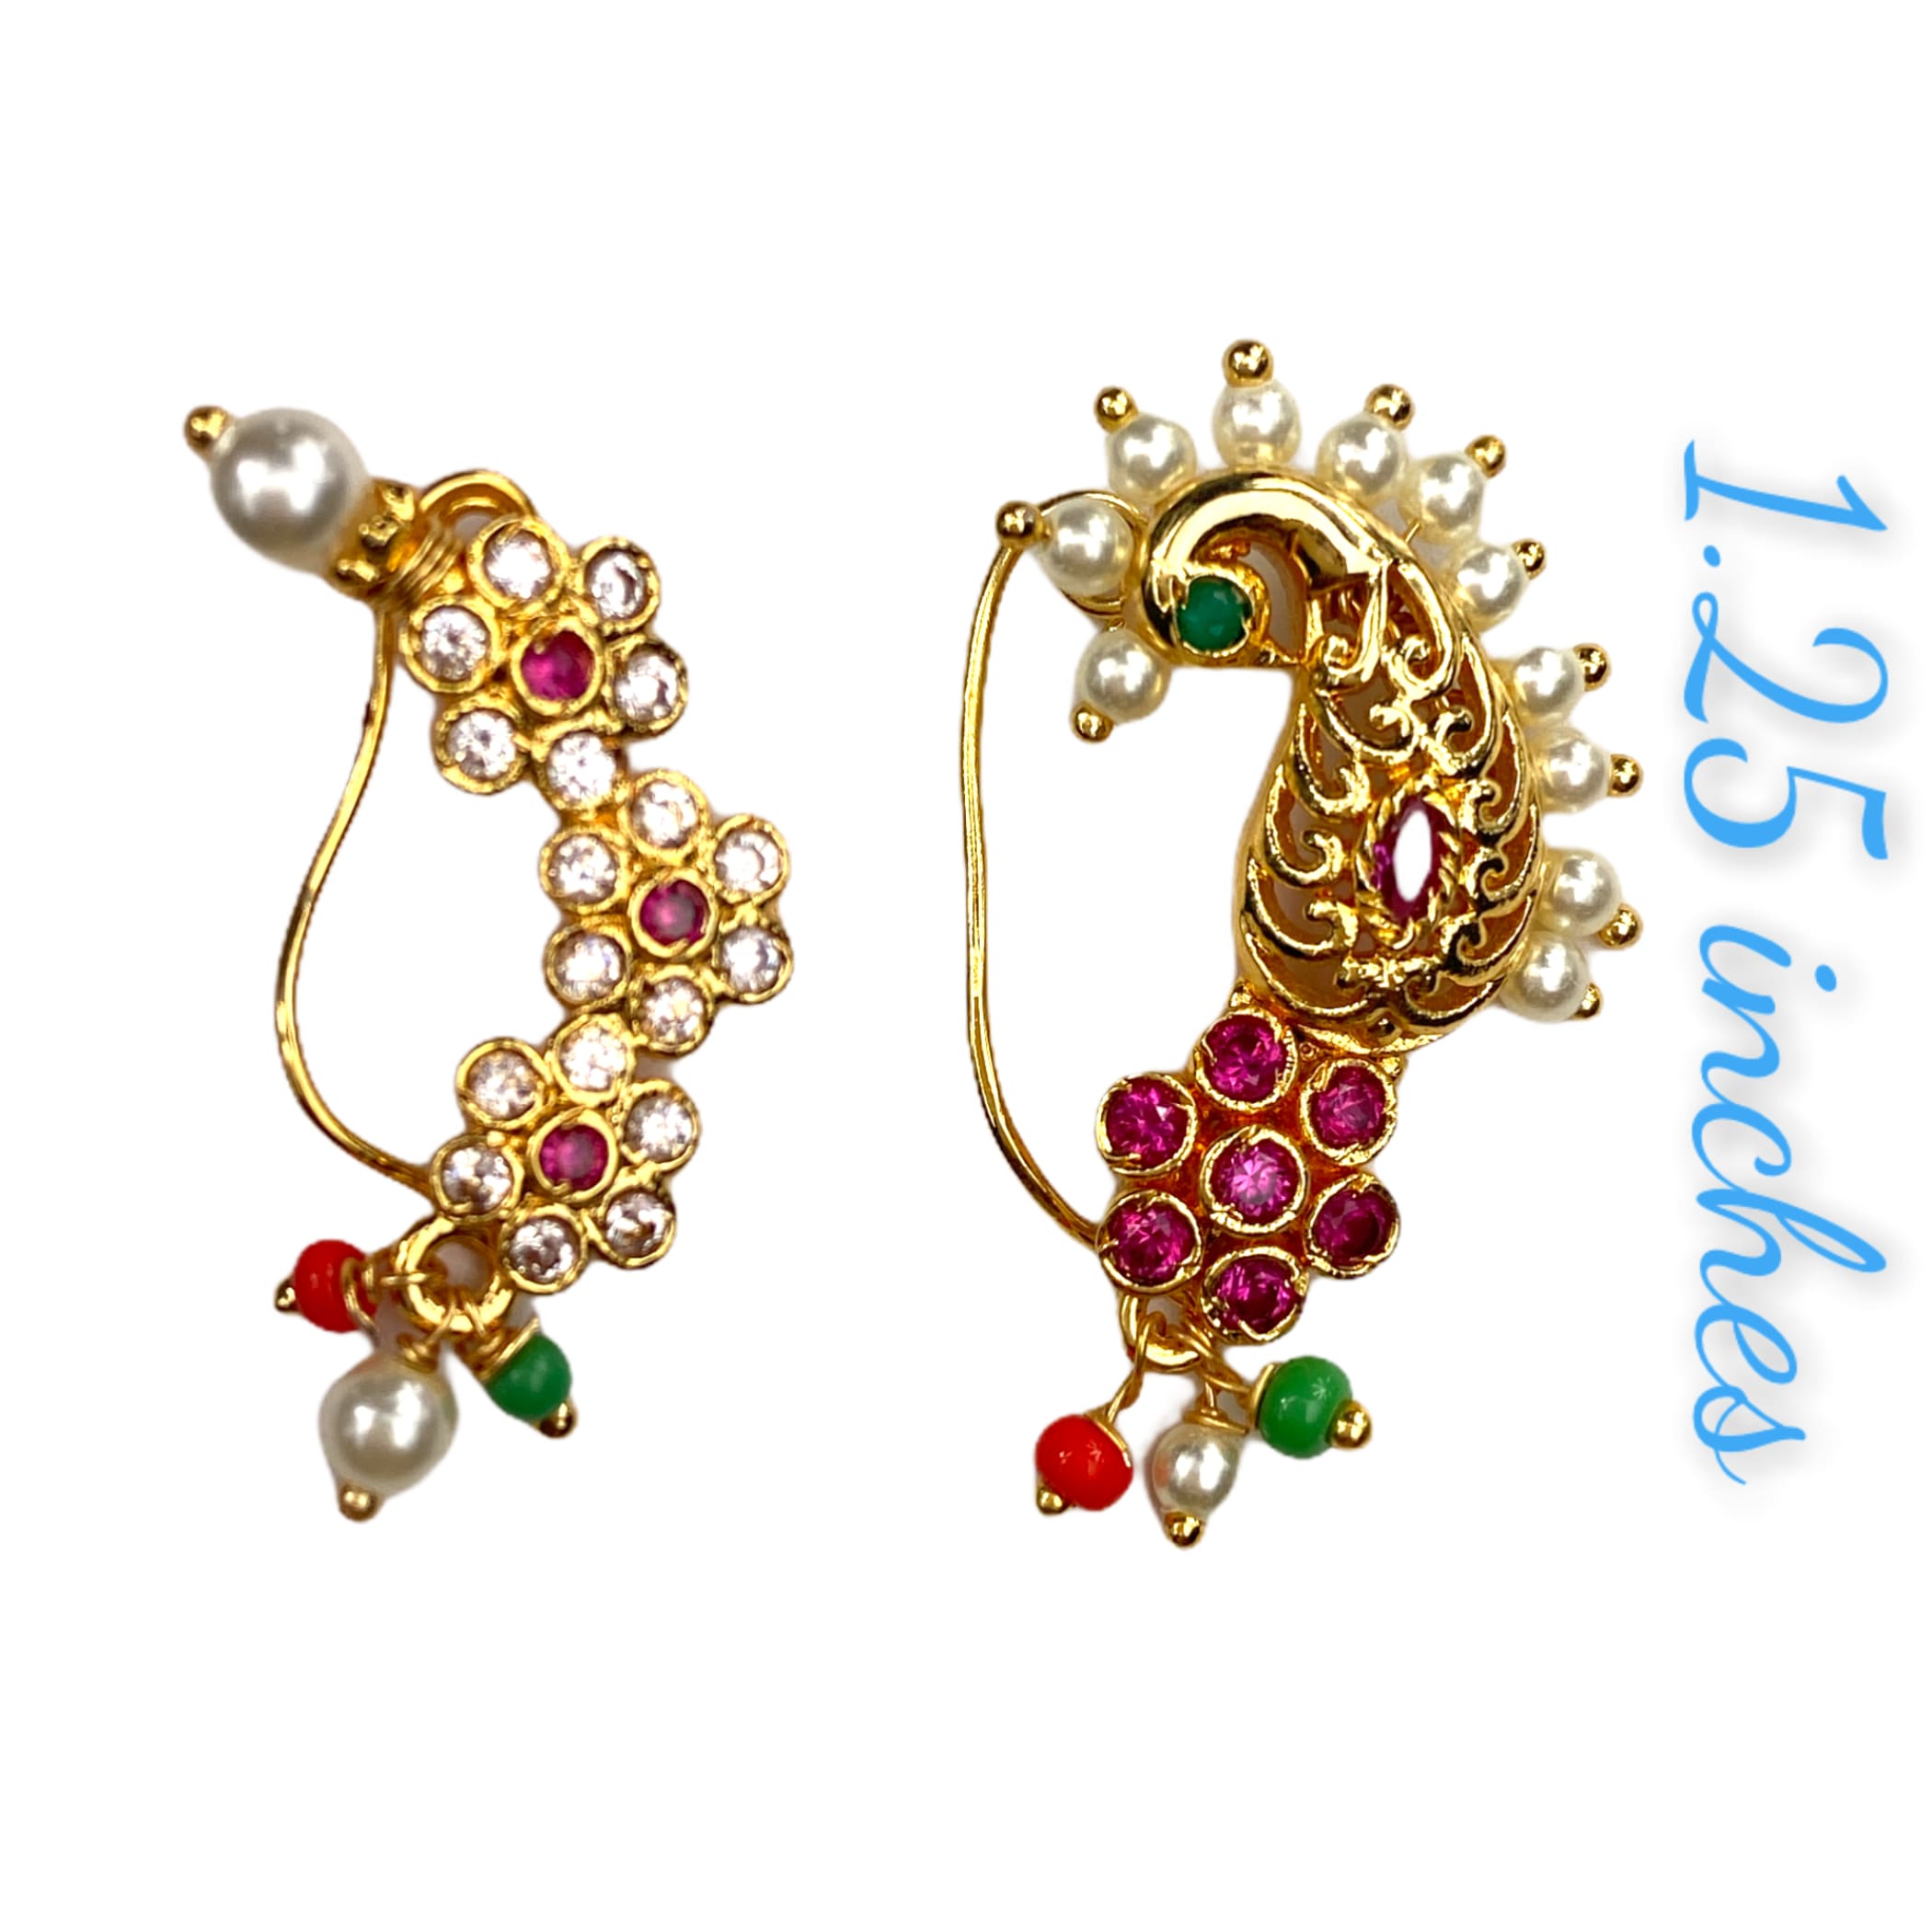 Clip On Antique Golden Pressing Nose Ring With Gold Plating